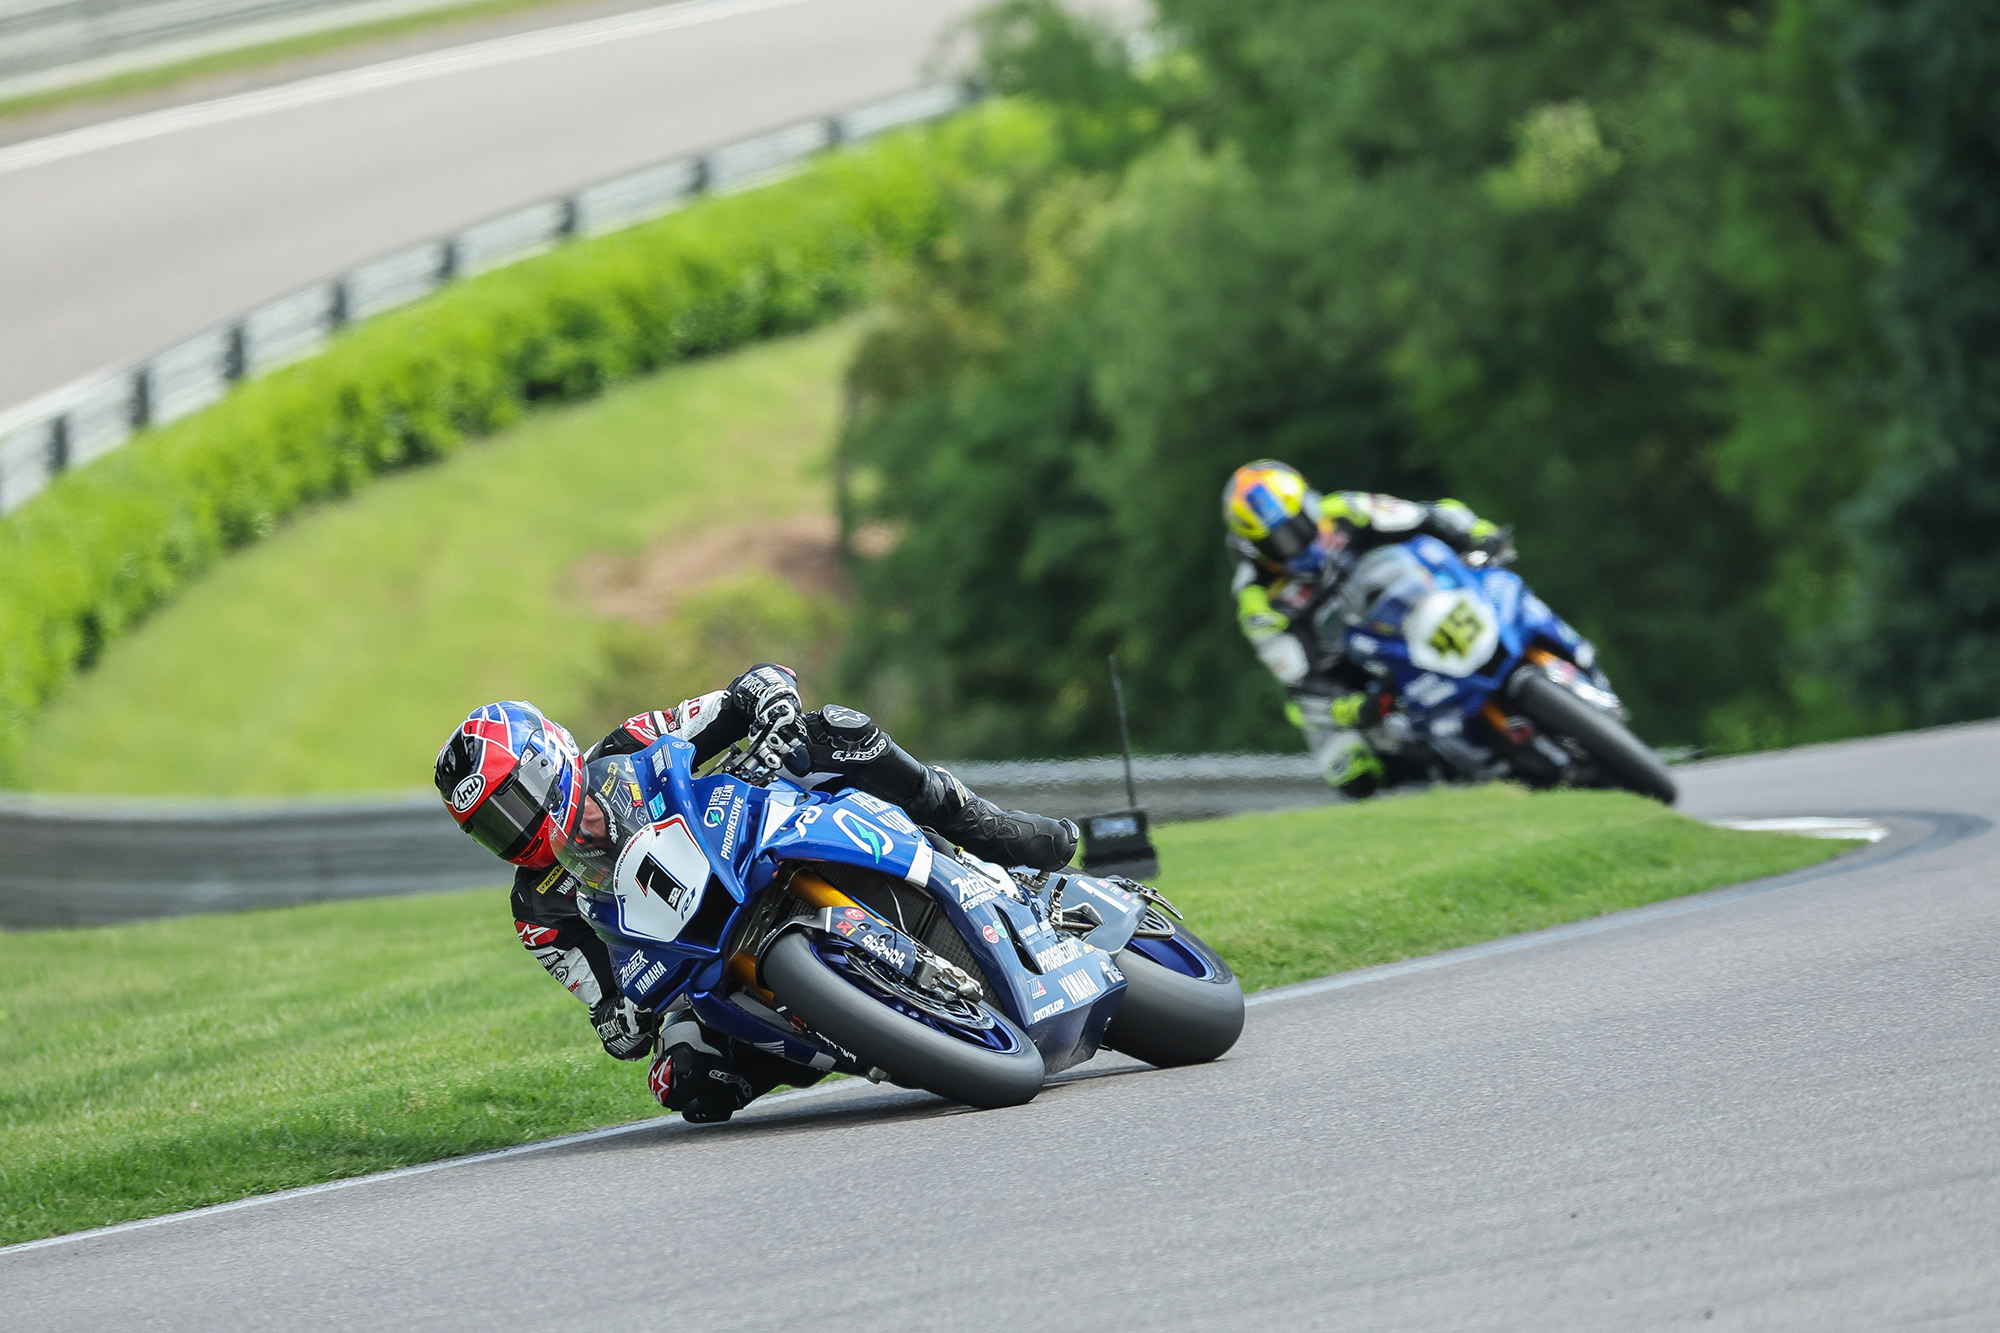 Gagne Claims Championship Lead with Back-to-Back Superbike
Victories image